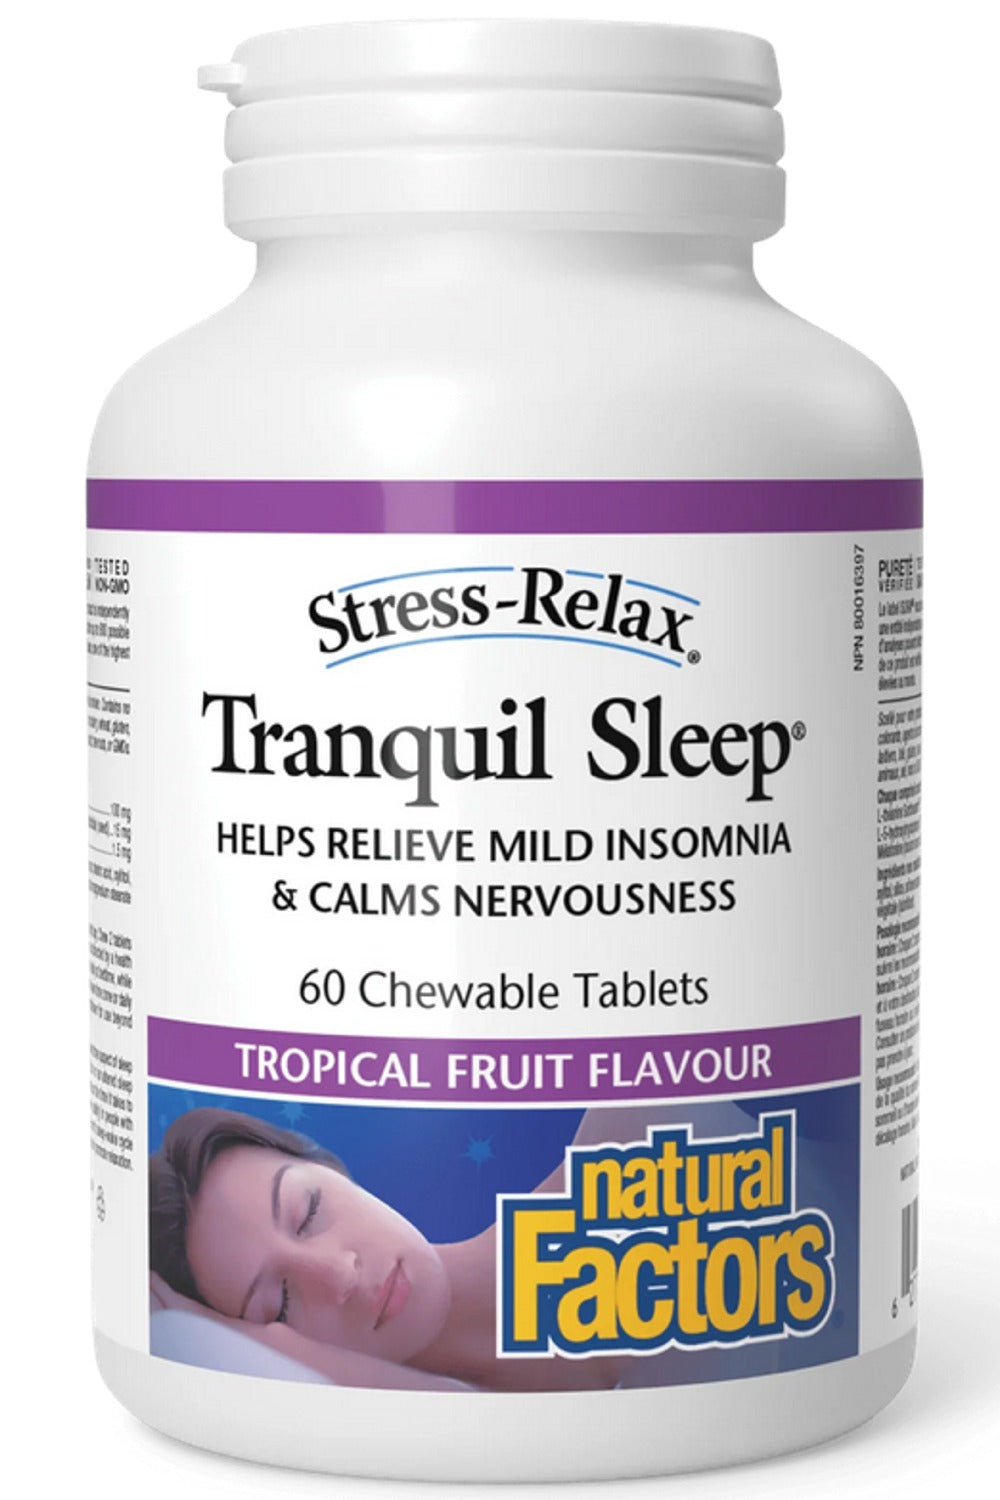 NATURAL FACTORS STRESS RELAX Tranquil Sleep (Tropical Fruit - 60 Chewables)